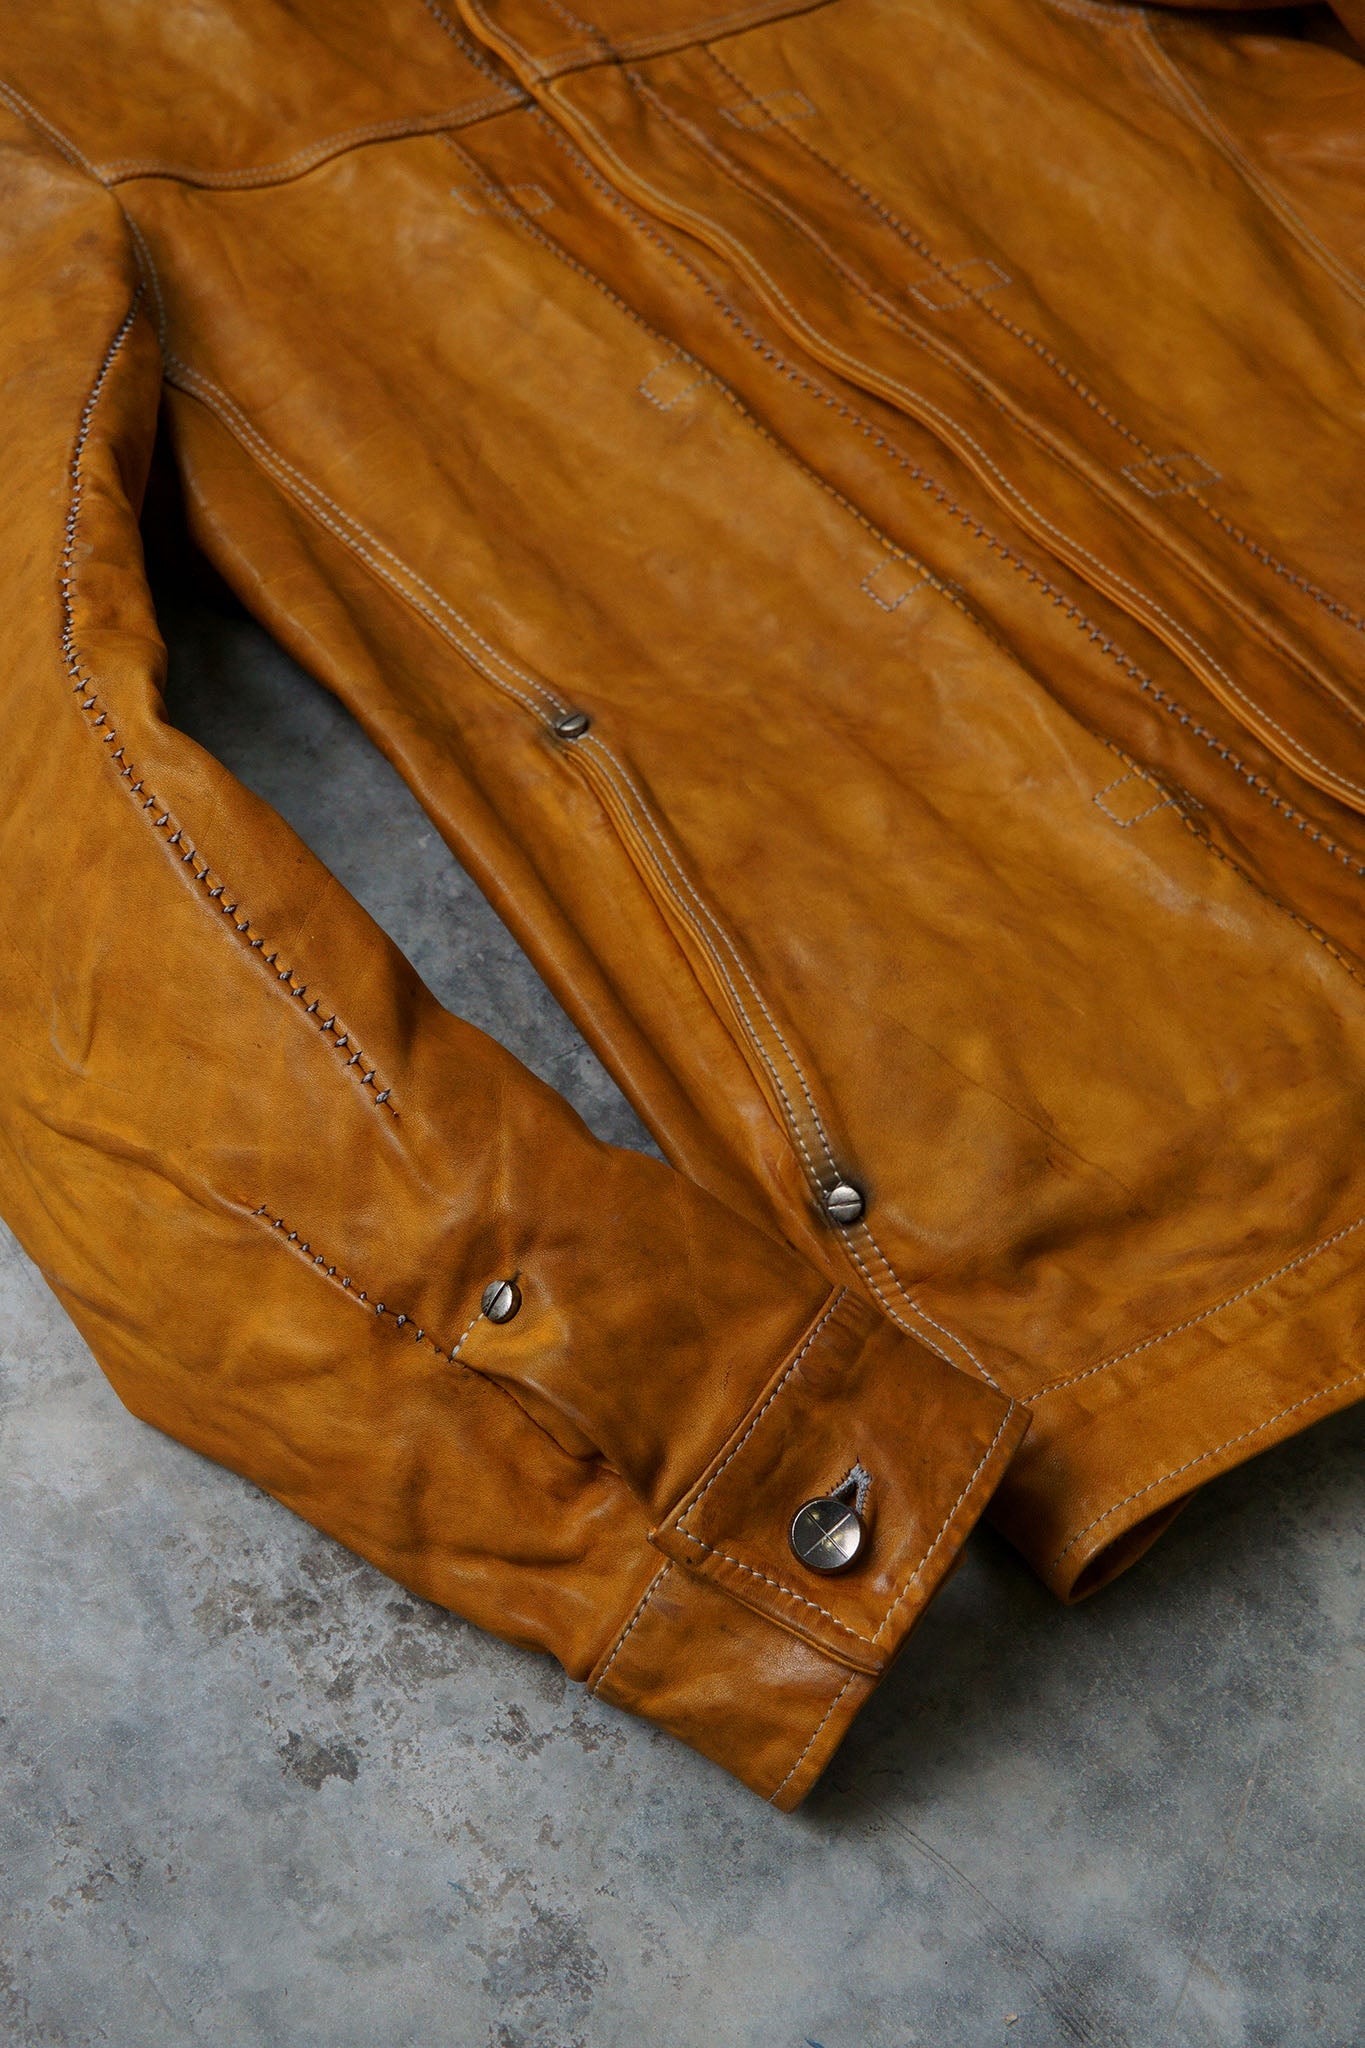 CALF LEATHER "JEAN" JACKET WITH ONE PIECE SLEEVES #2